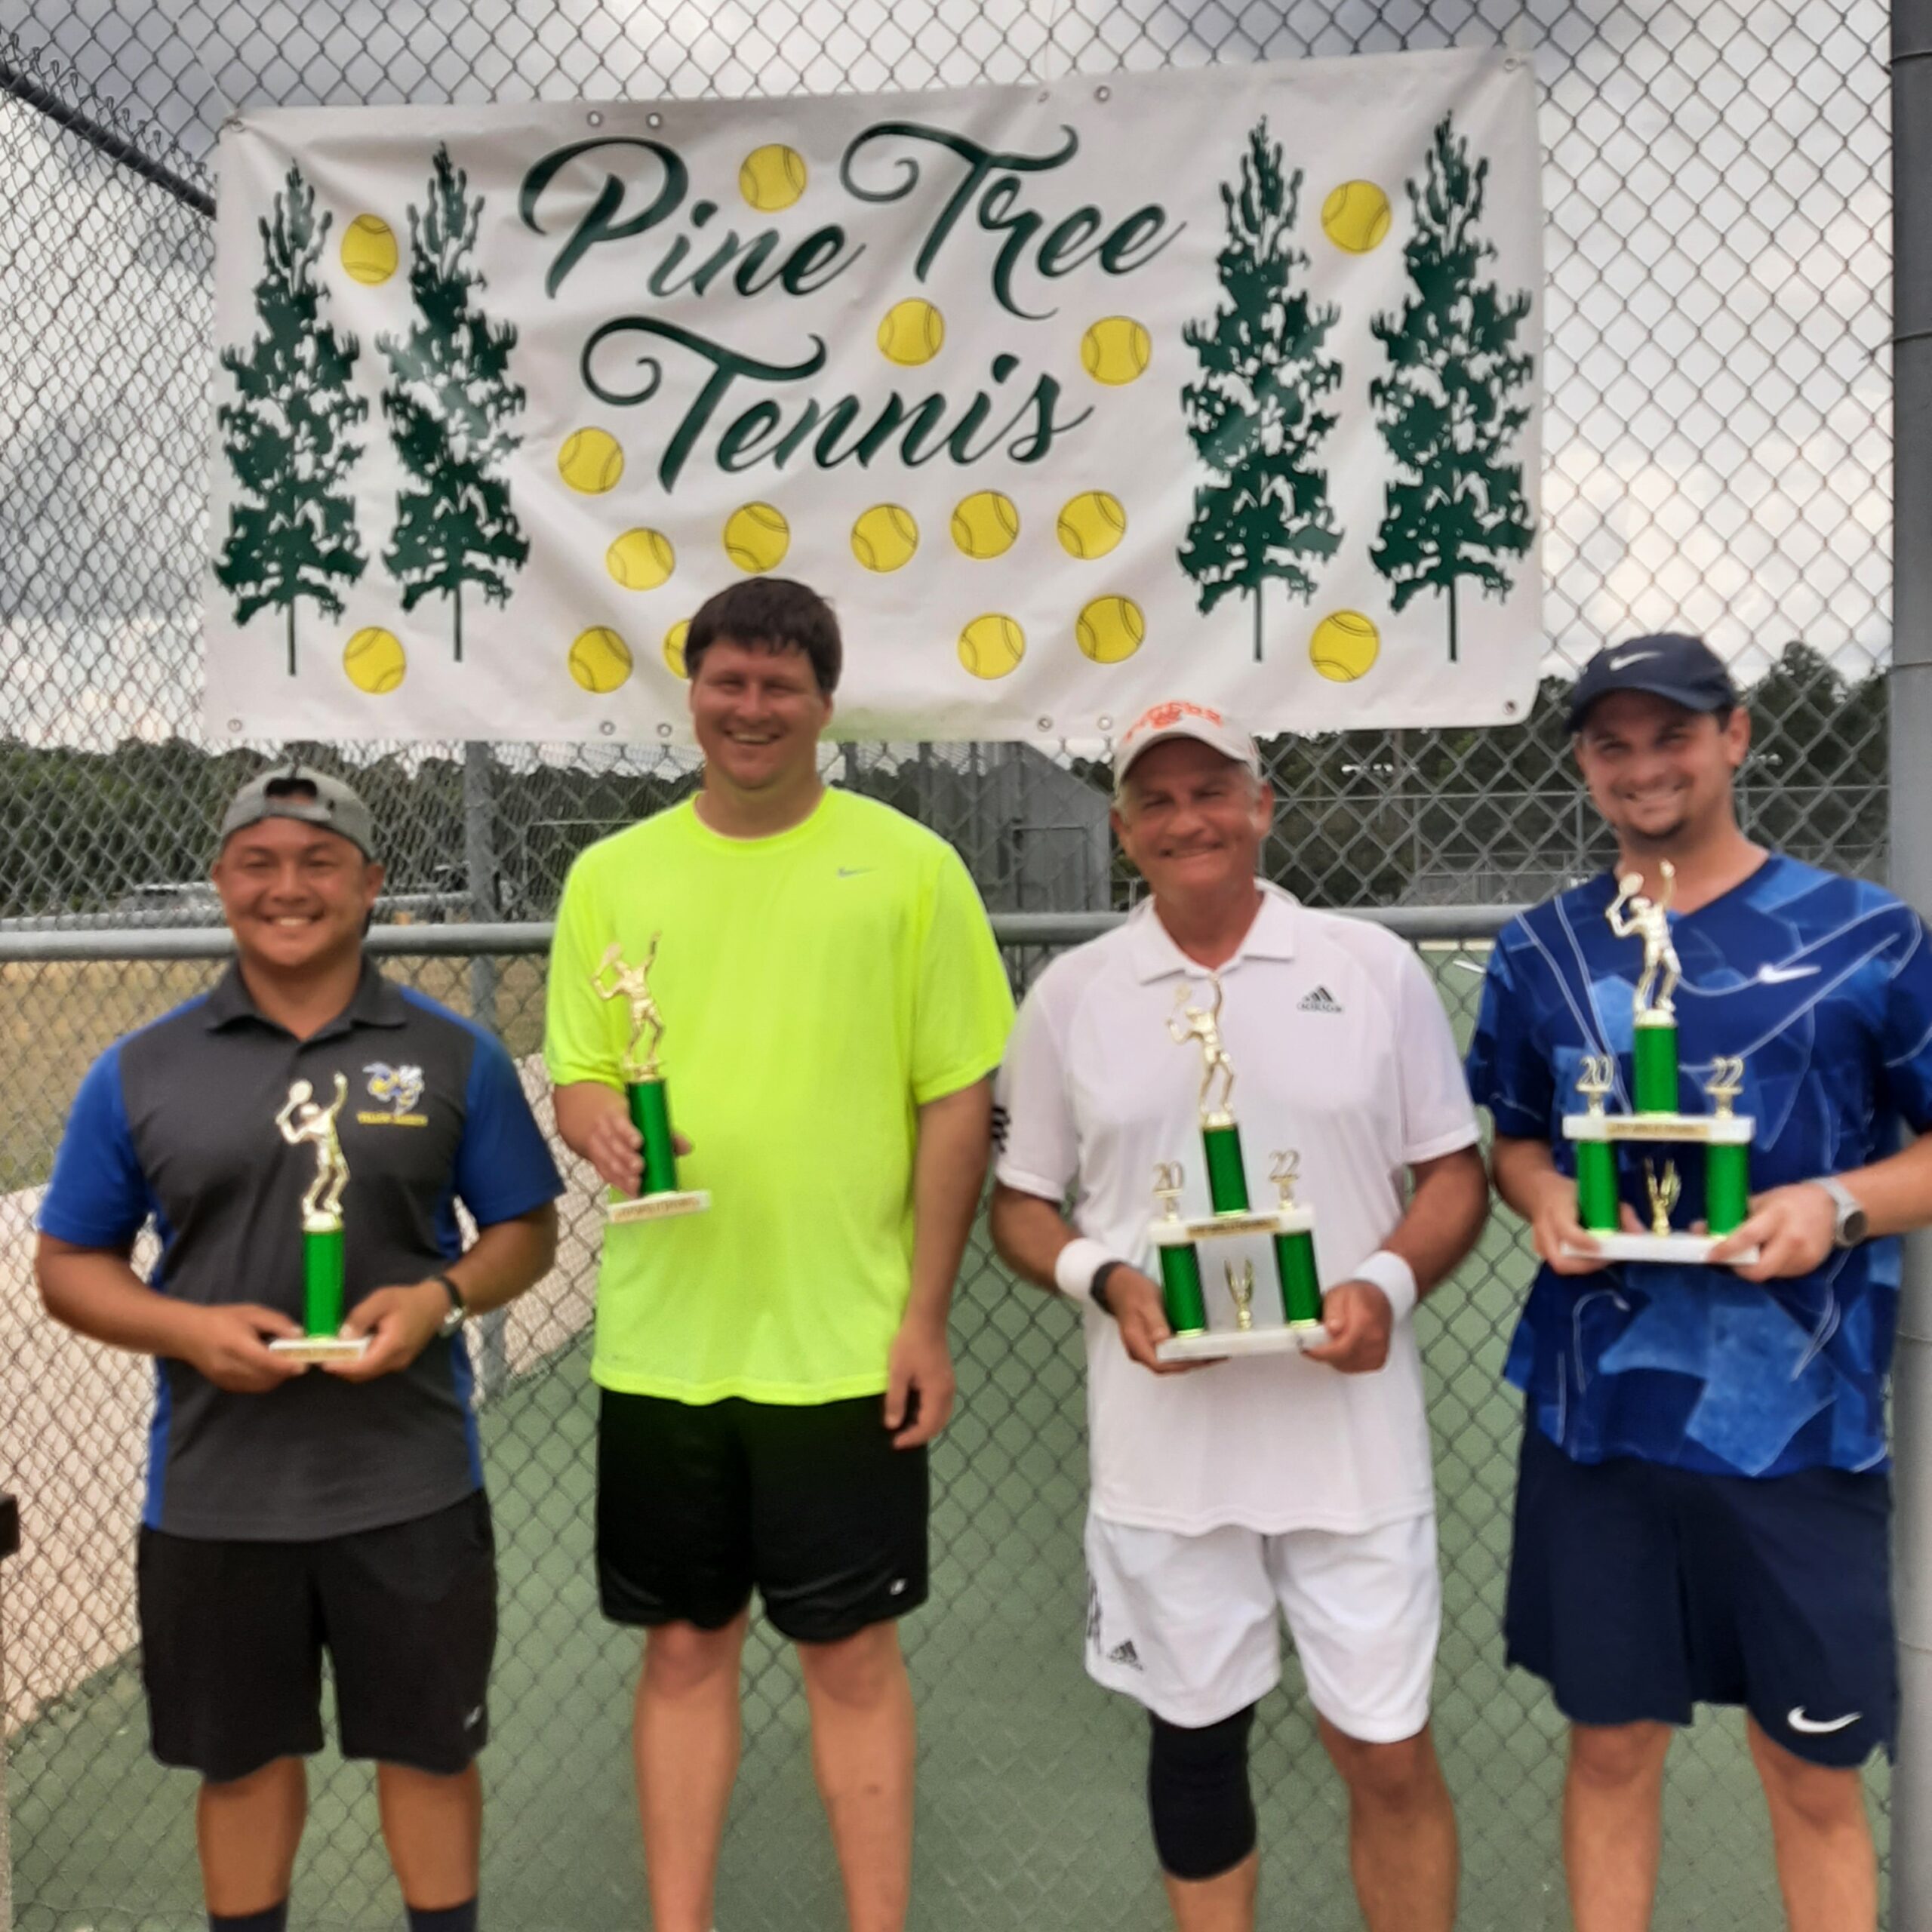 Pine Tree Festival Tennis Tournament Applications Available Pine Tree